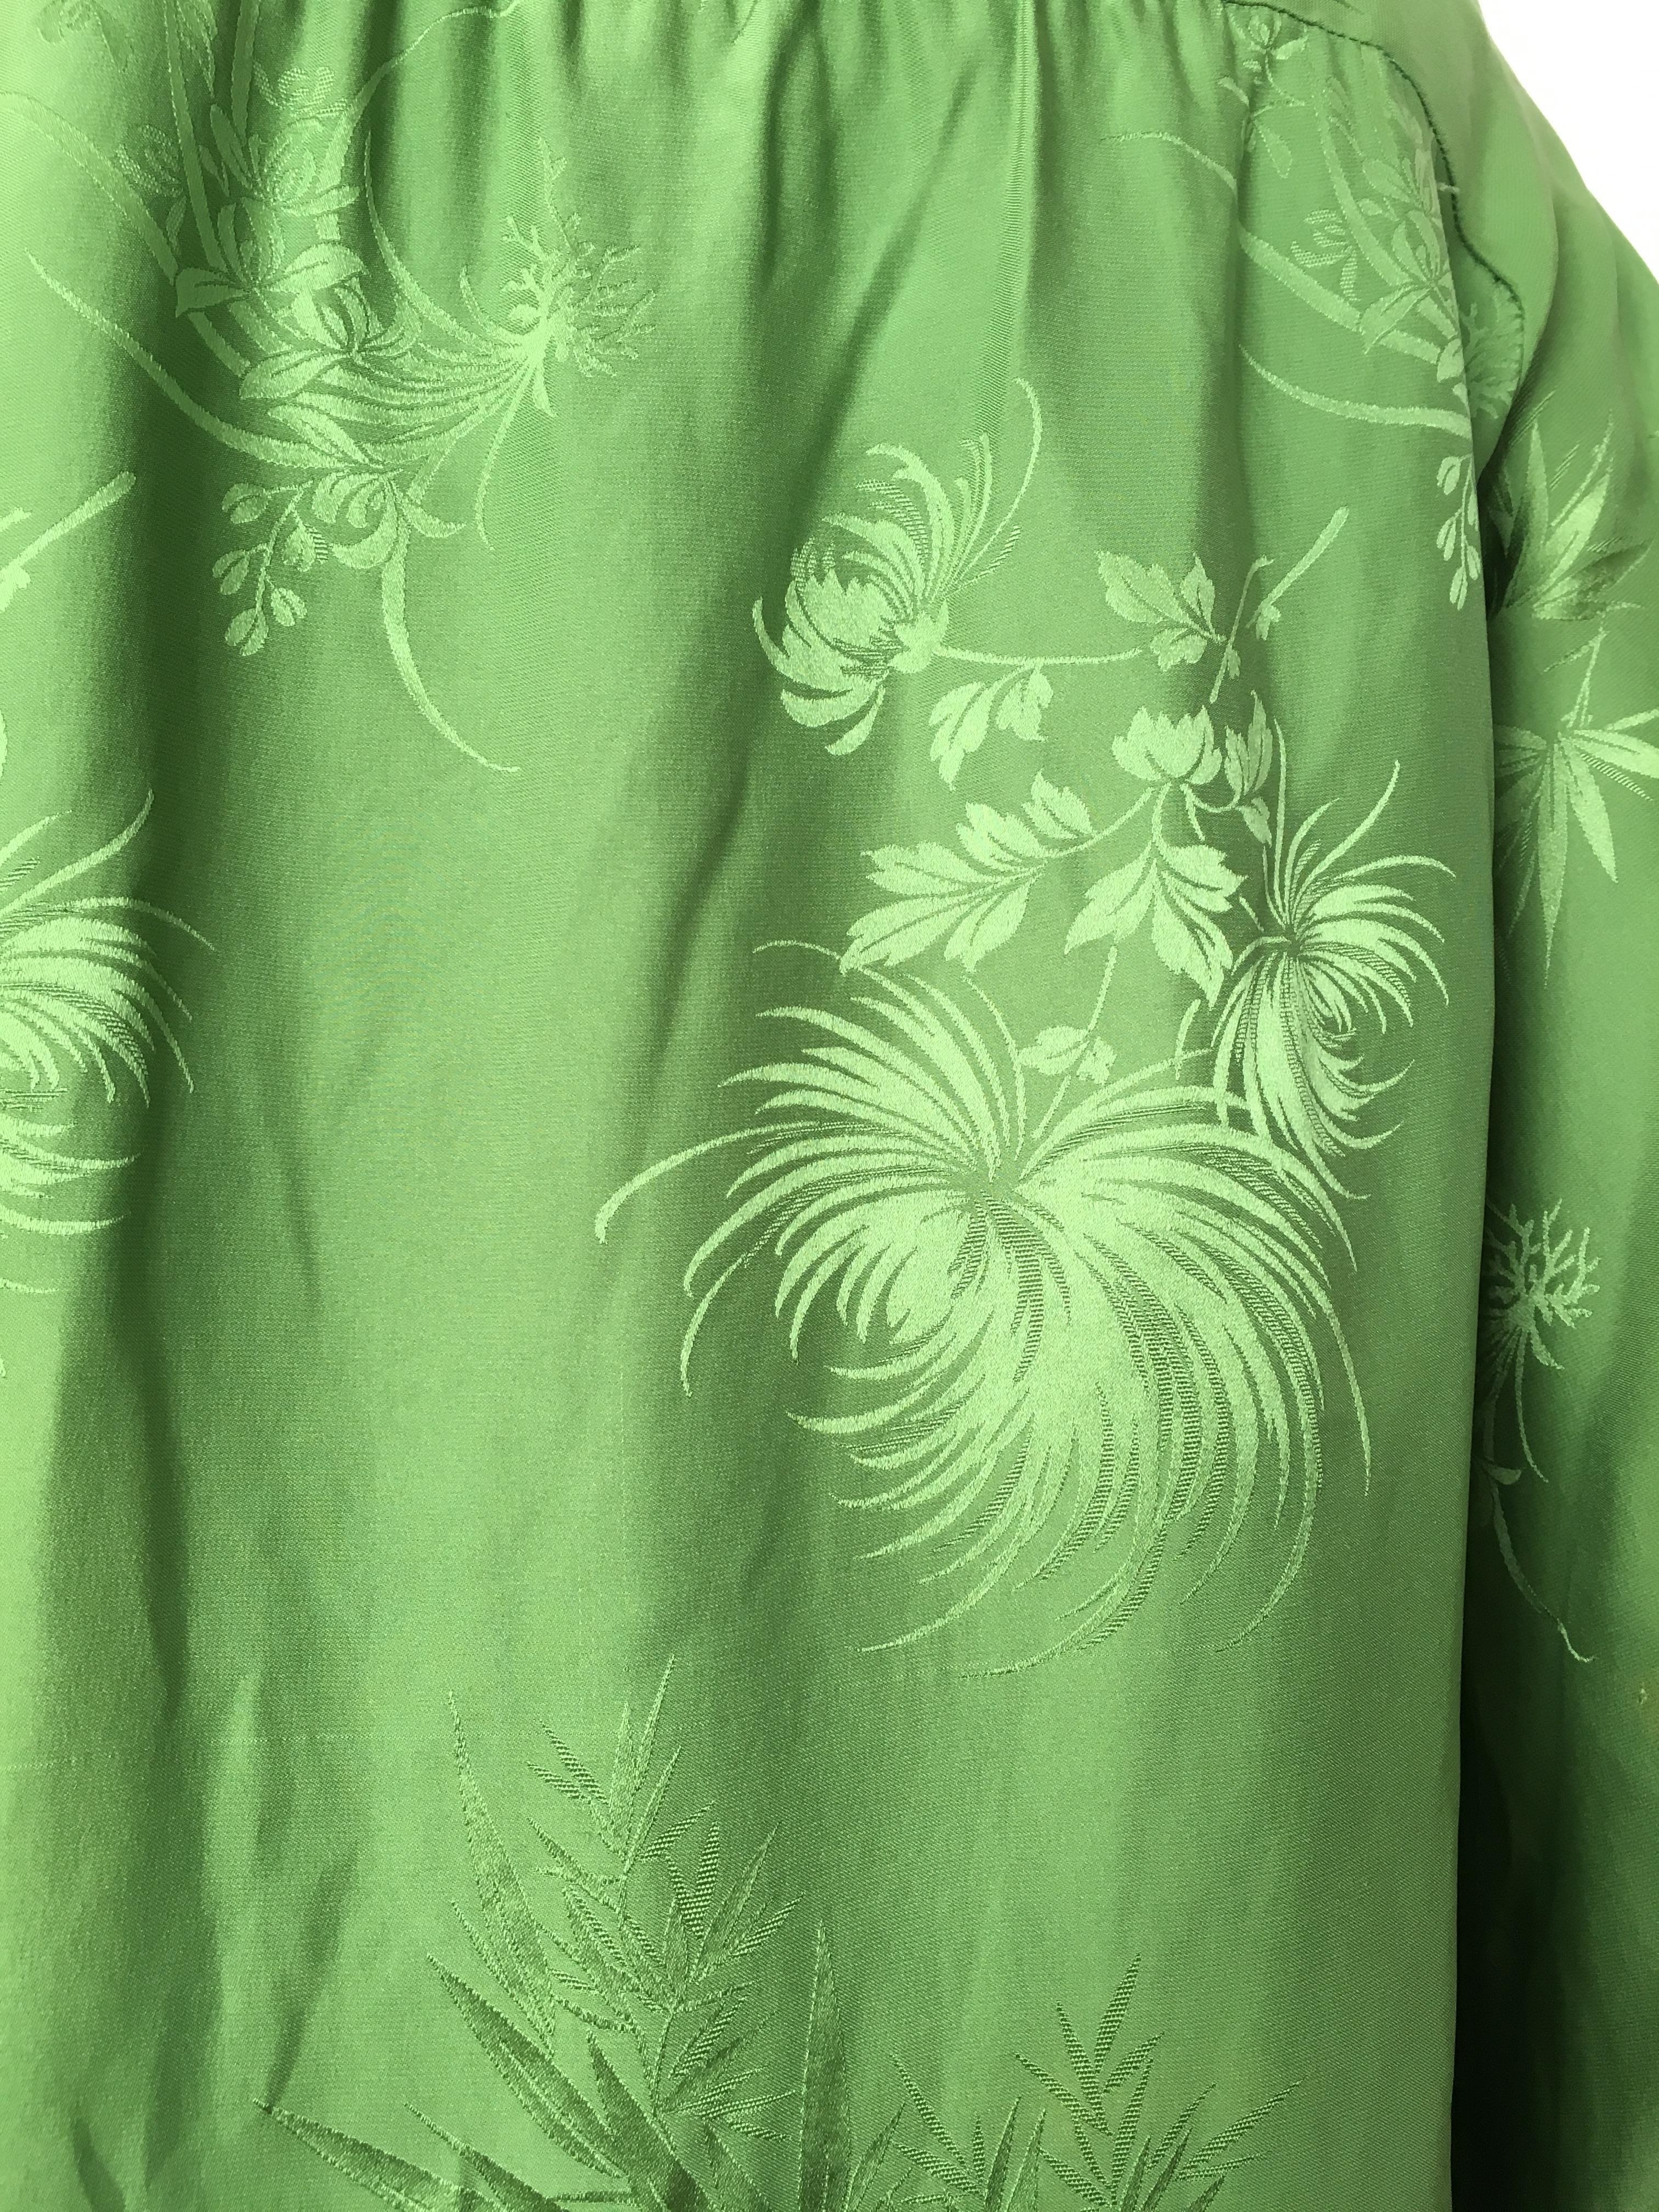 Malcolm Starr 1970s Green Silk Long Sleeve Blouse Size 6/8. For Sale 5